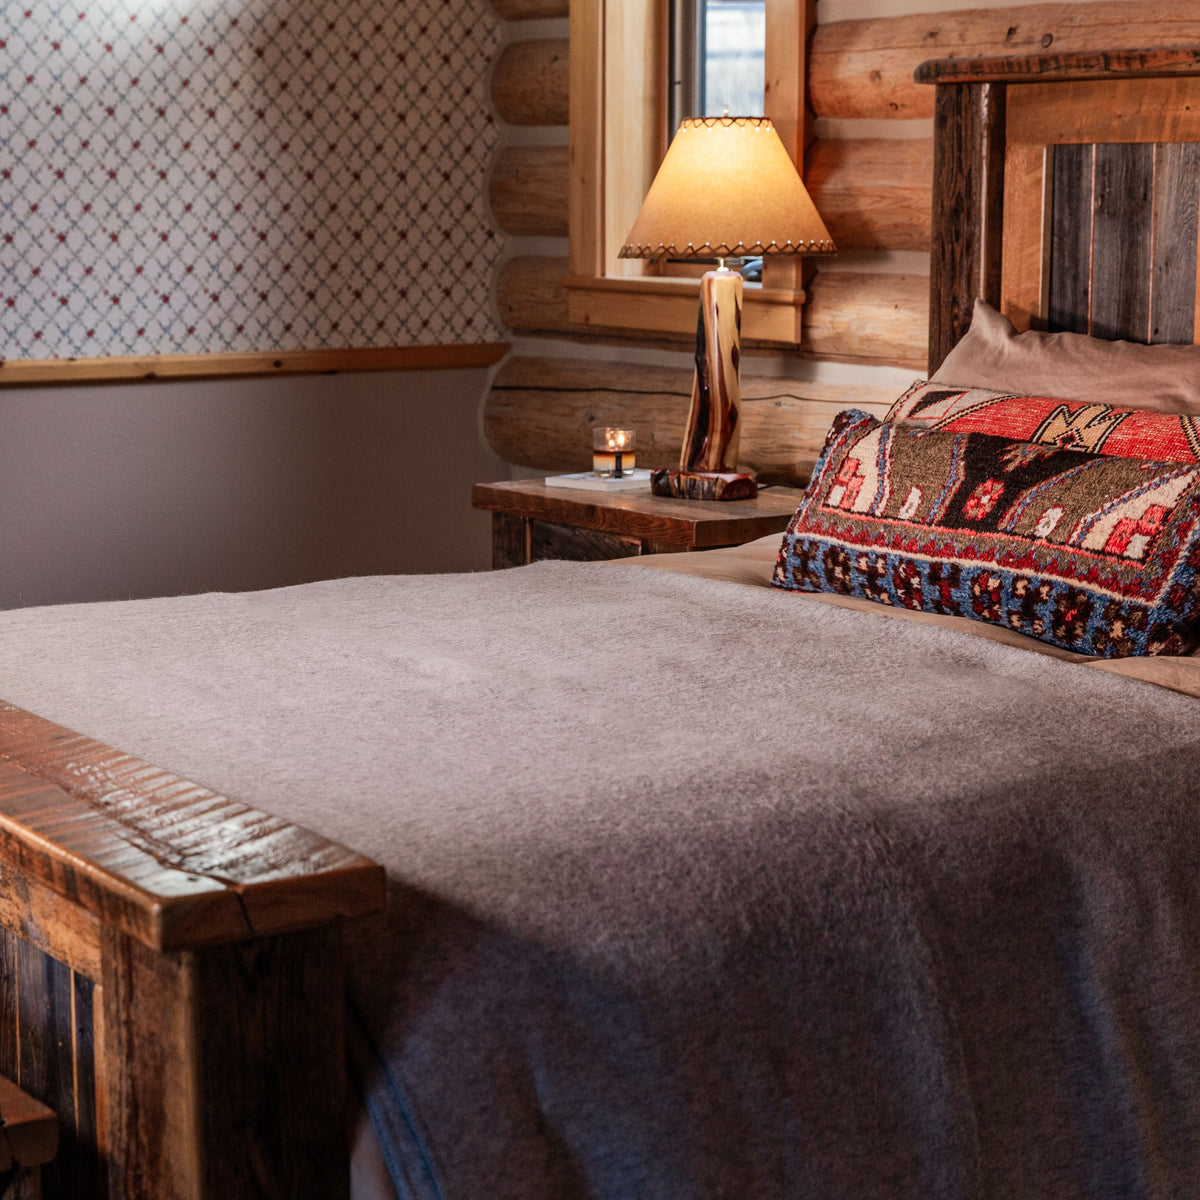 A cabin bedroom with a lamp and wooden bedframe. On the bed are several decorative pillows and a mid-gray Alpacas of Montana warm cozy lightweight moisture wicking soft plush king and queen size blanket.